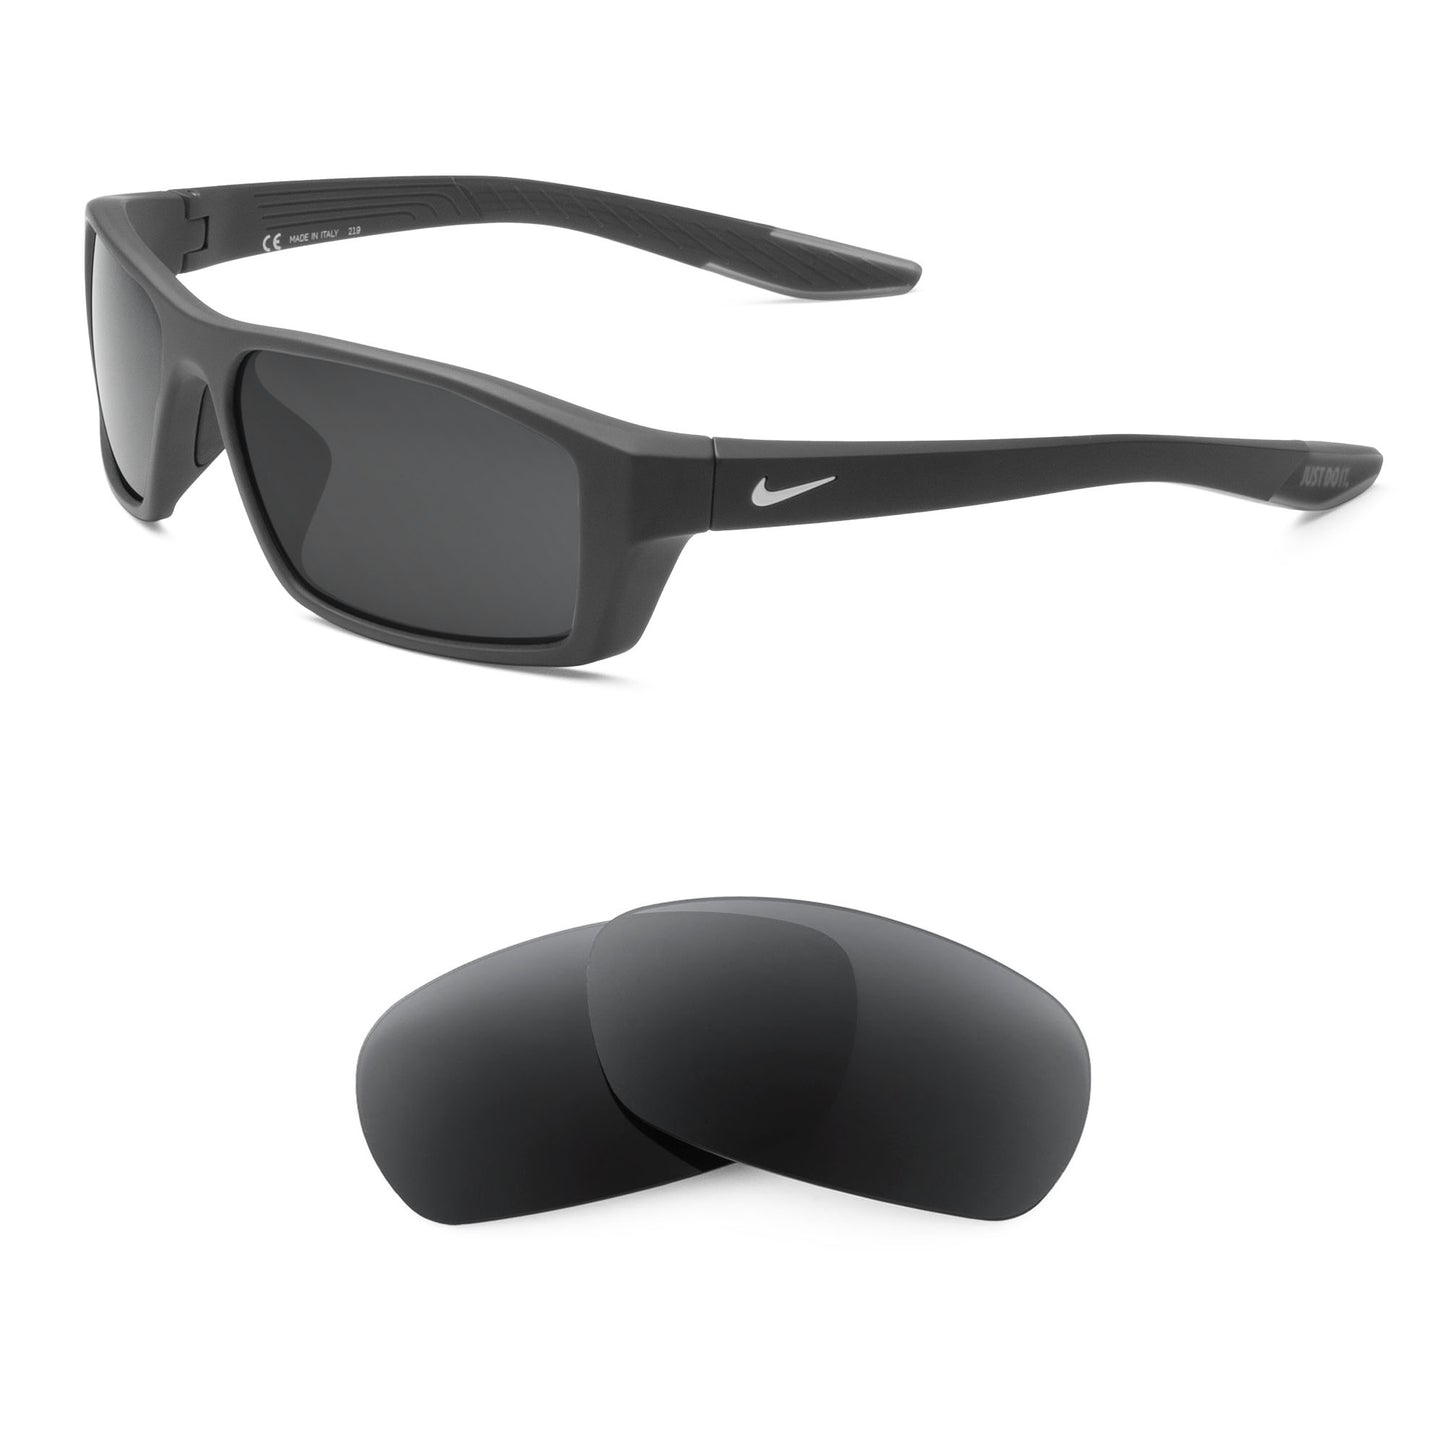 Nike Brazen Shadow sunglasses with replacement lenses